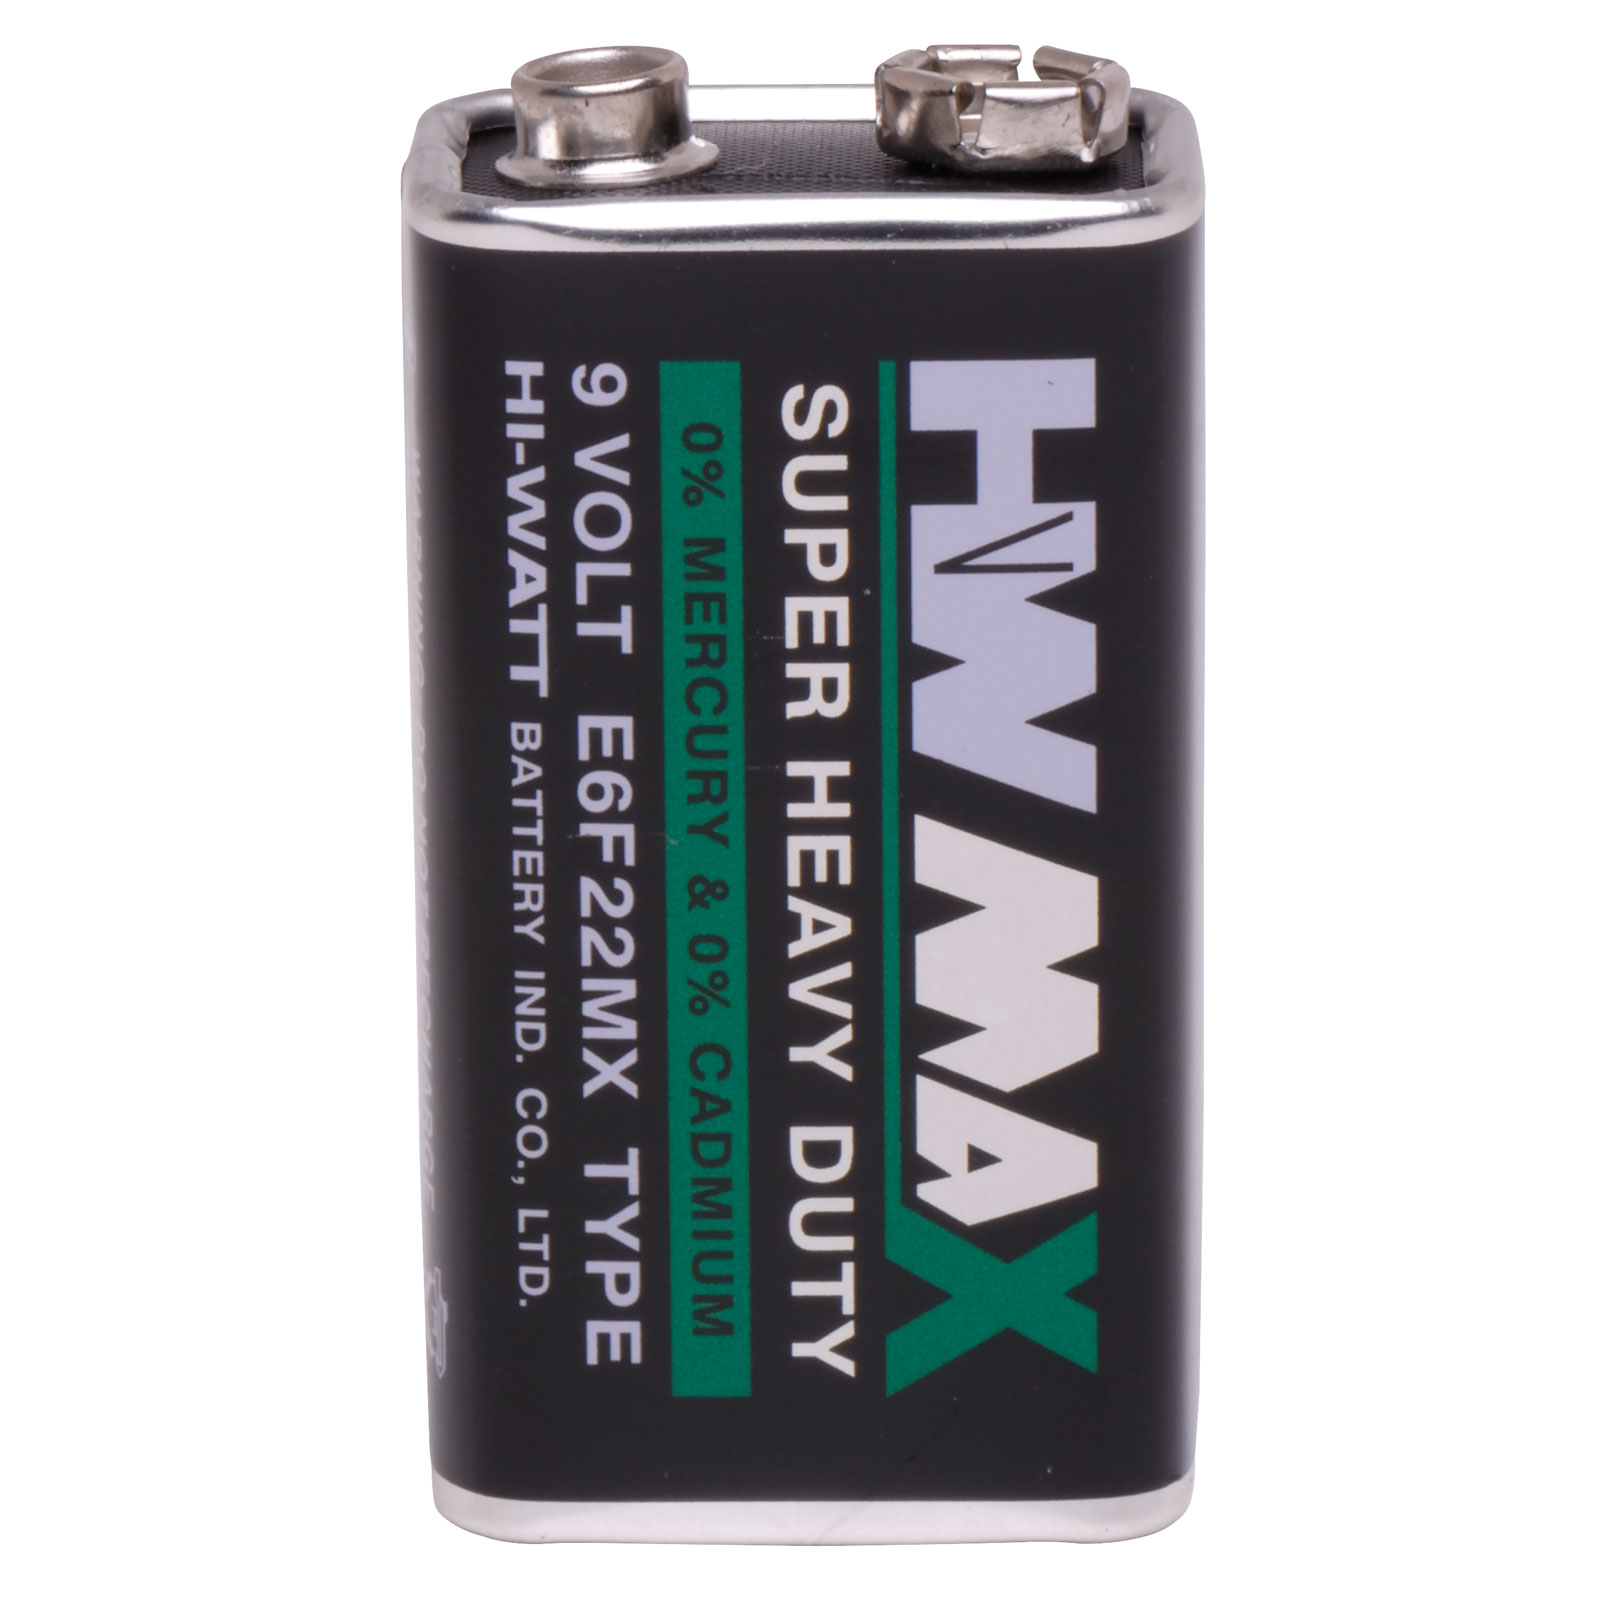 FLAGPOWER iSH09-M993781mn Flagpower LCS1620 Lithium Battery Fast